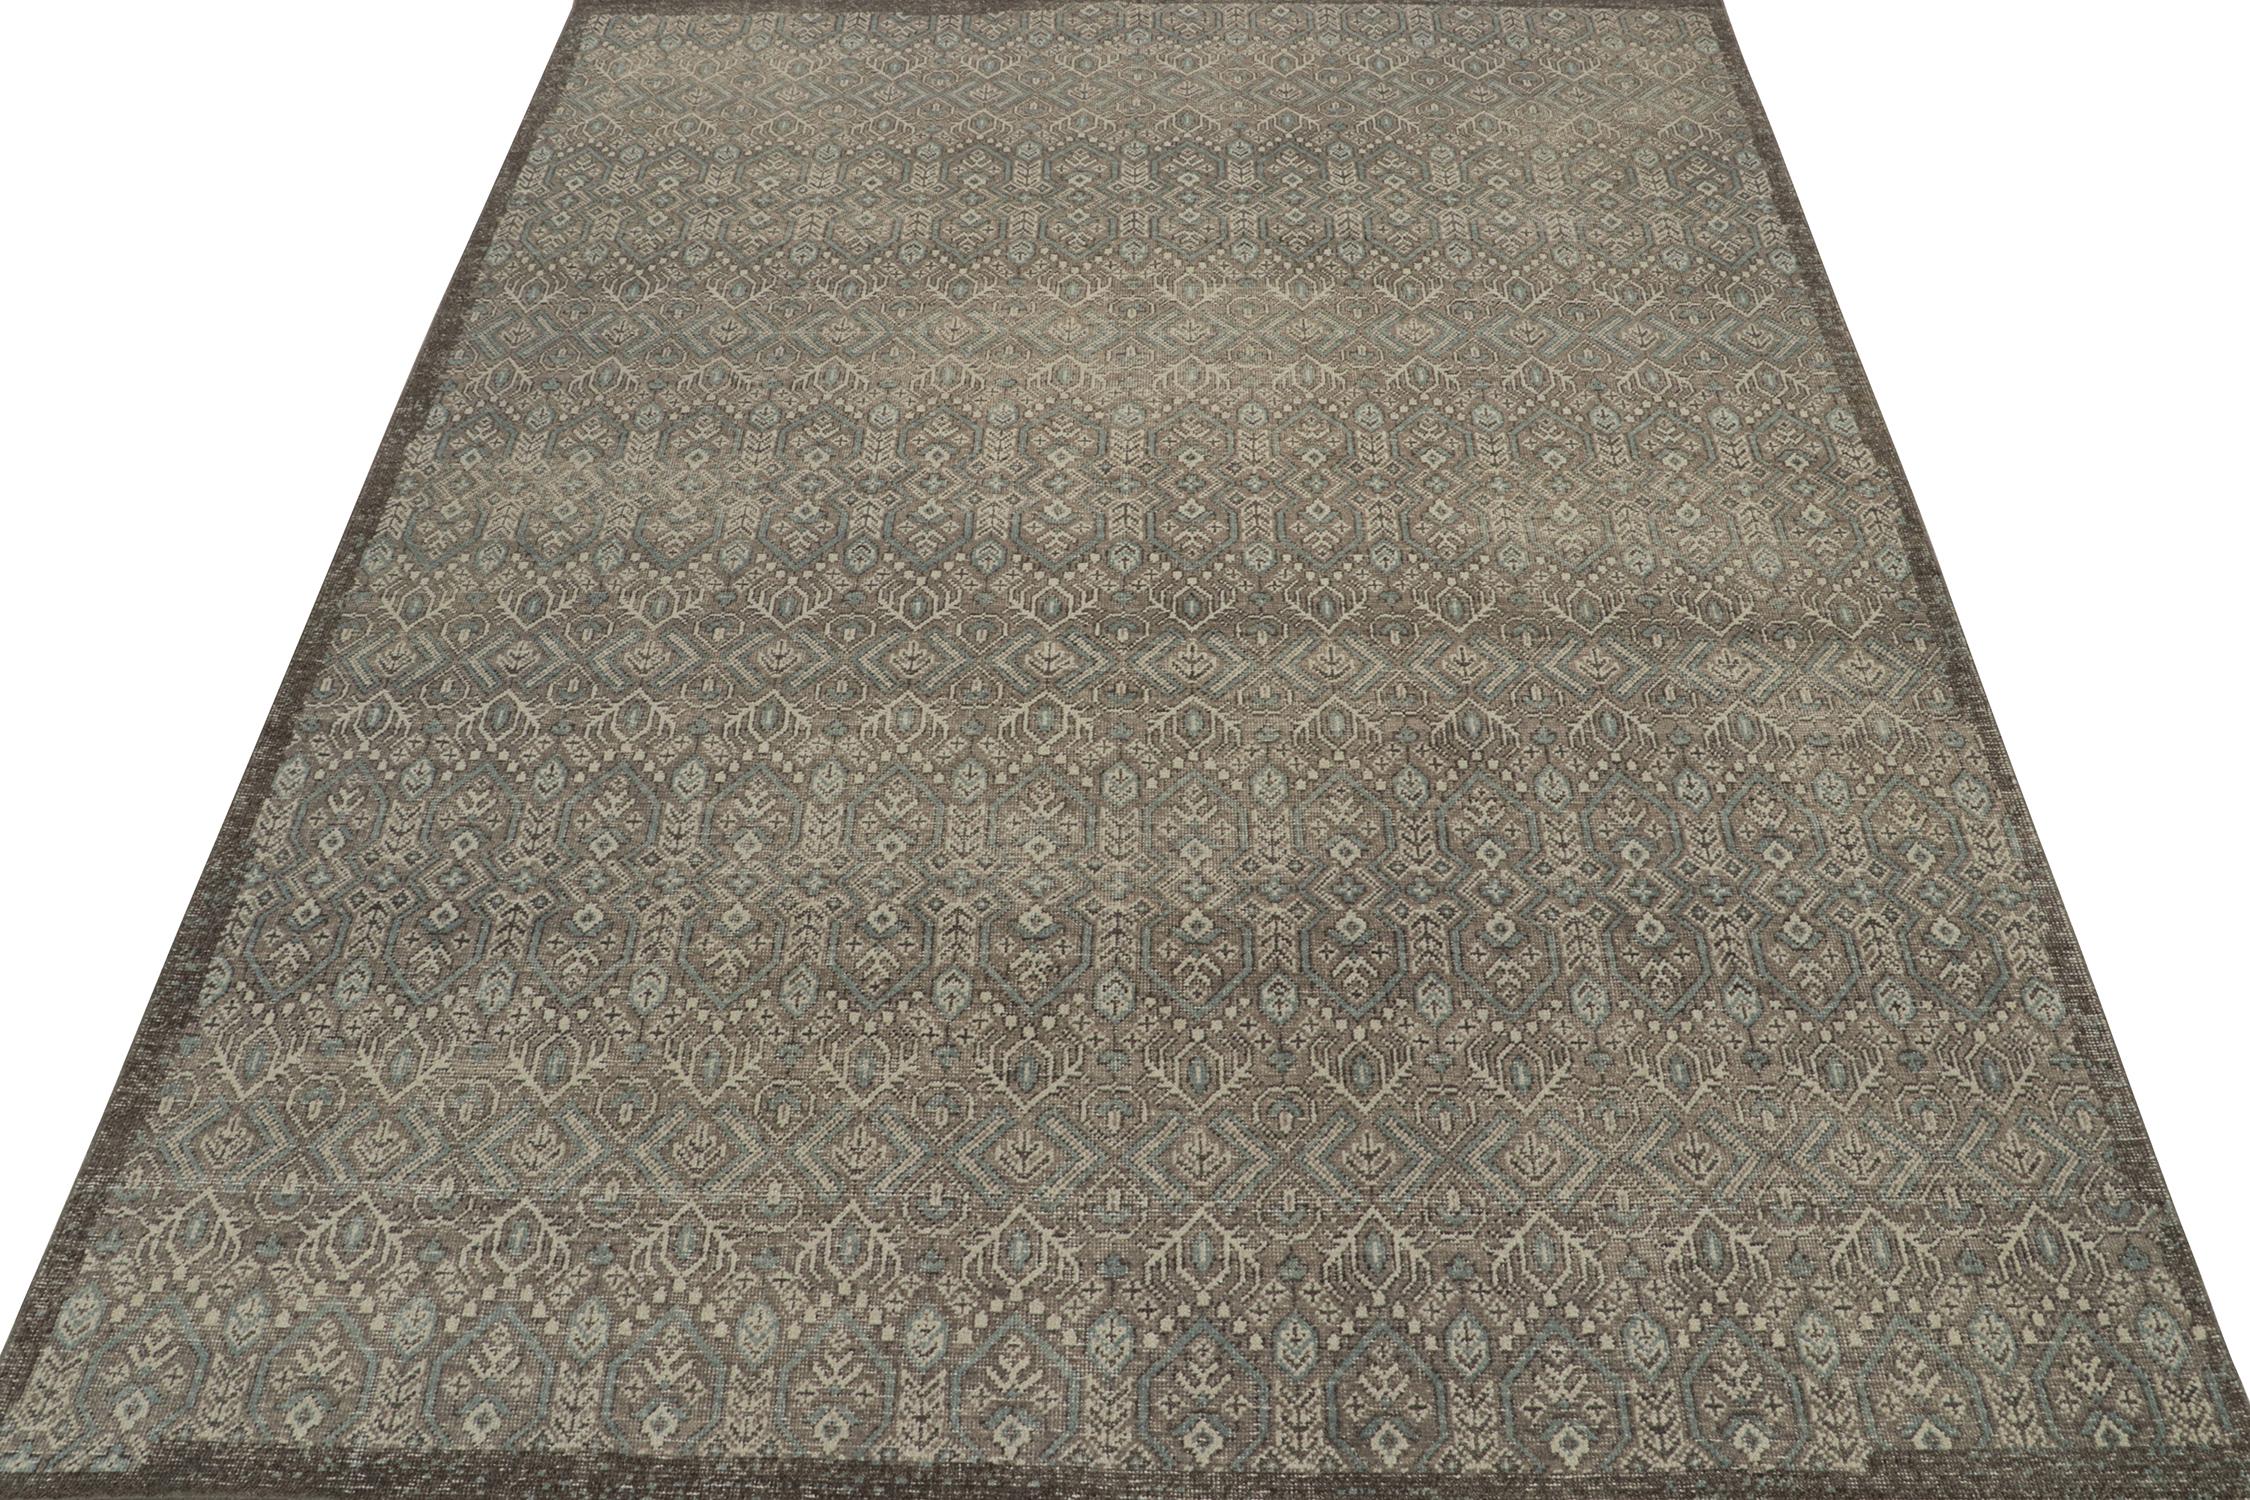 This 9x12 rug is a regal new addition to the Homage Collection by Rug & Kilim. Hand-knotted in wool and cotton, it recaptures antique tribal rug styles in a fresh take on Rustic Modern design.

Further on the Design:

This particular design calls on